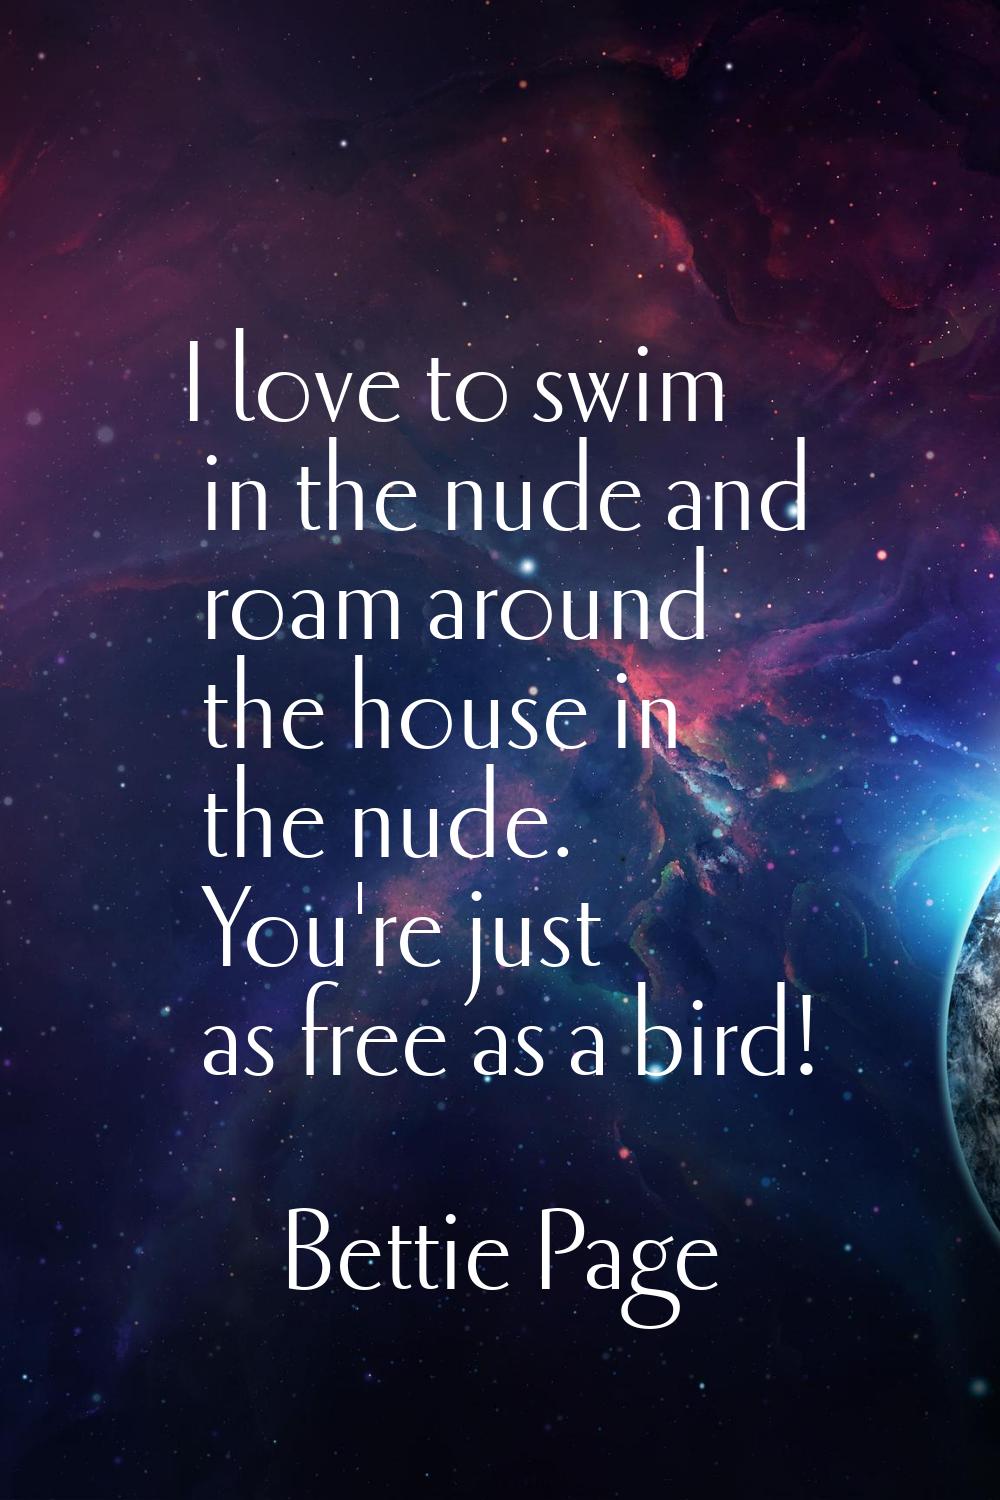 I love to swim in the nude and roam around the house in the nude. You're just as free as a bird!